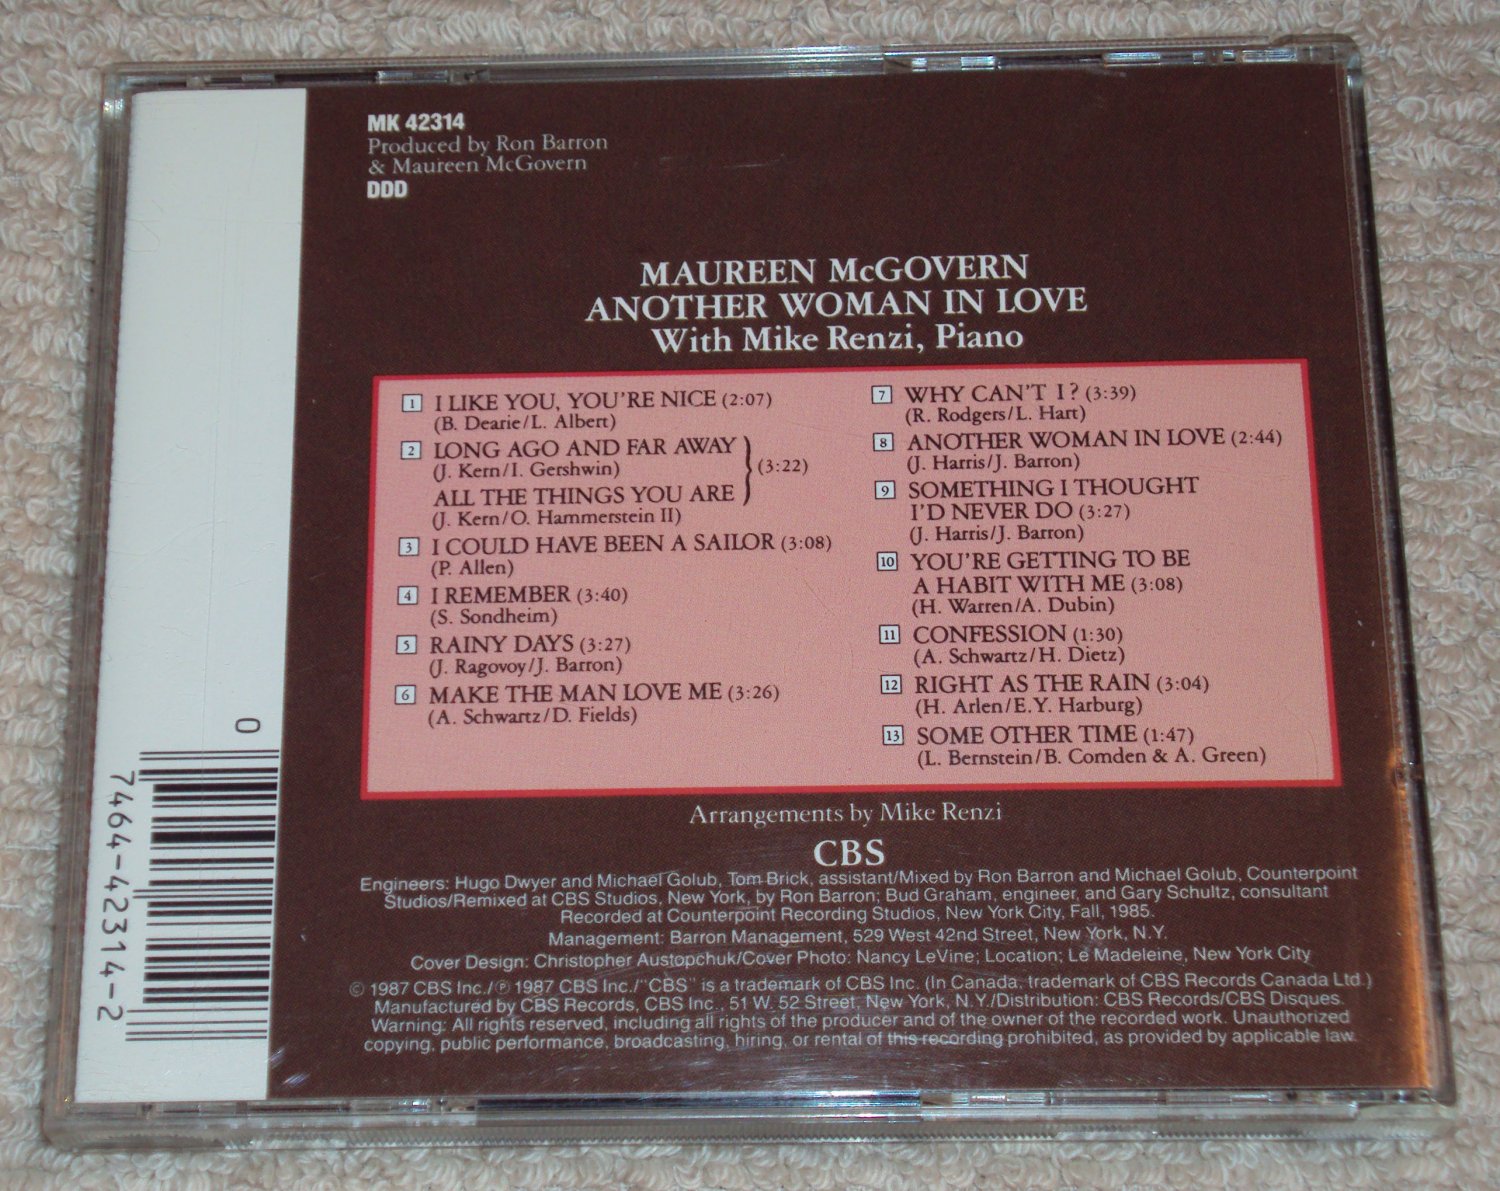 Maureen Mcgovern Another Woman In Love Cd With Mike Renzi On Piano